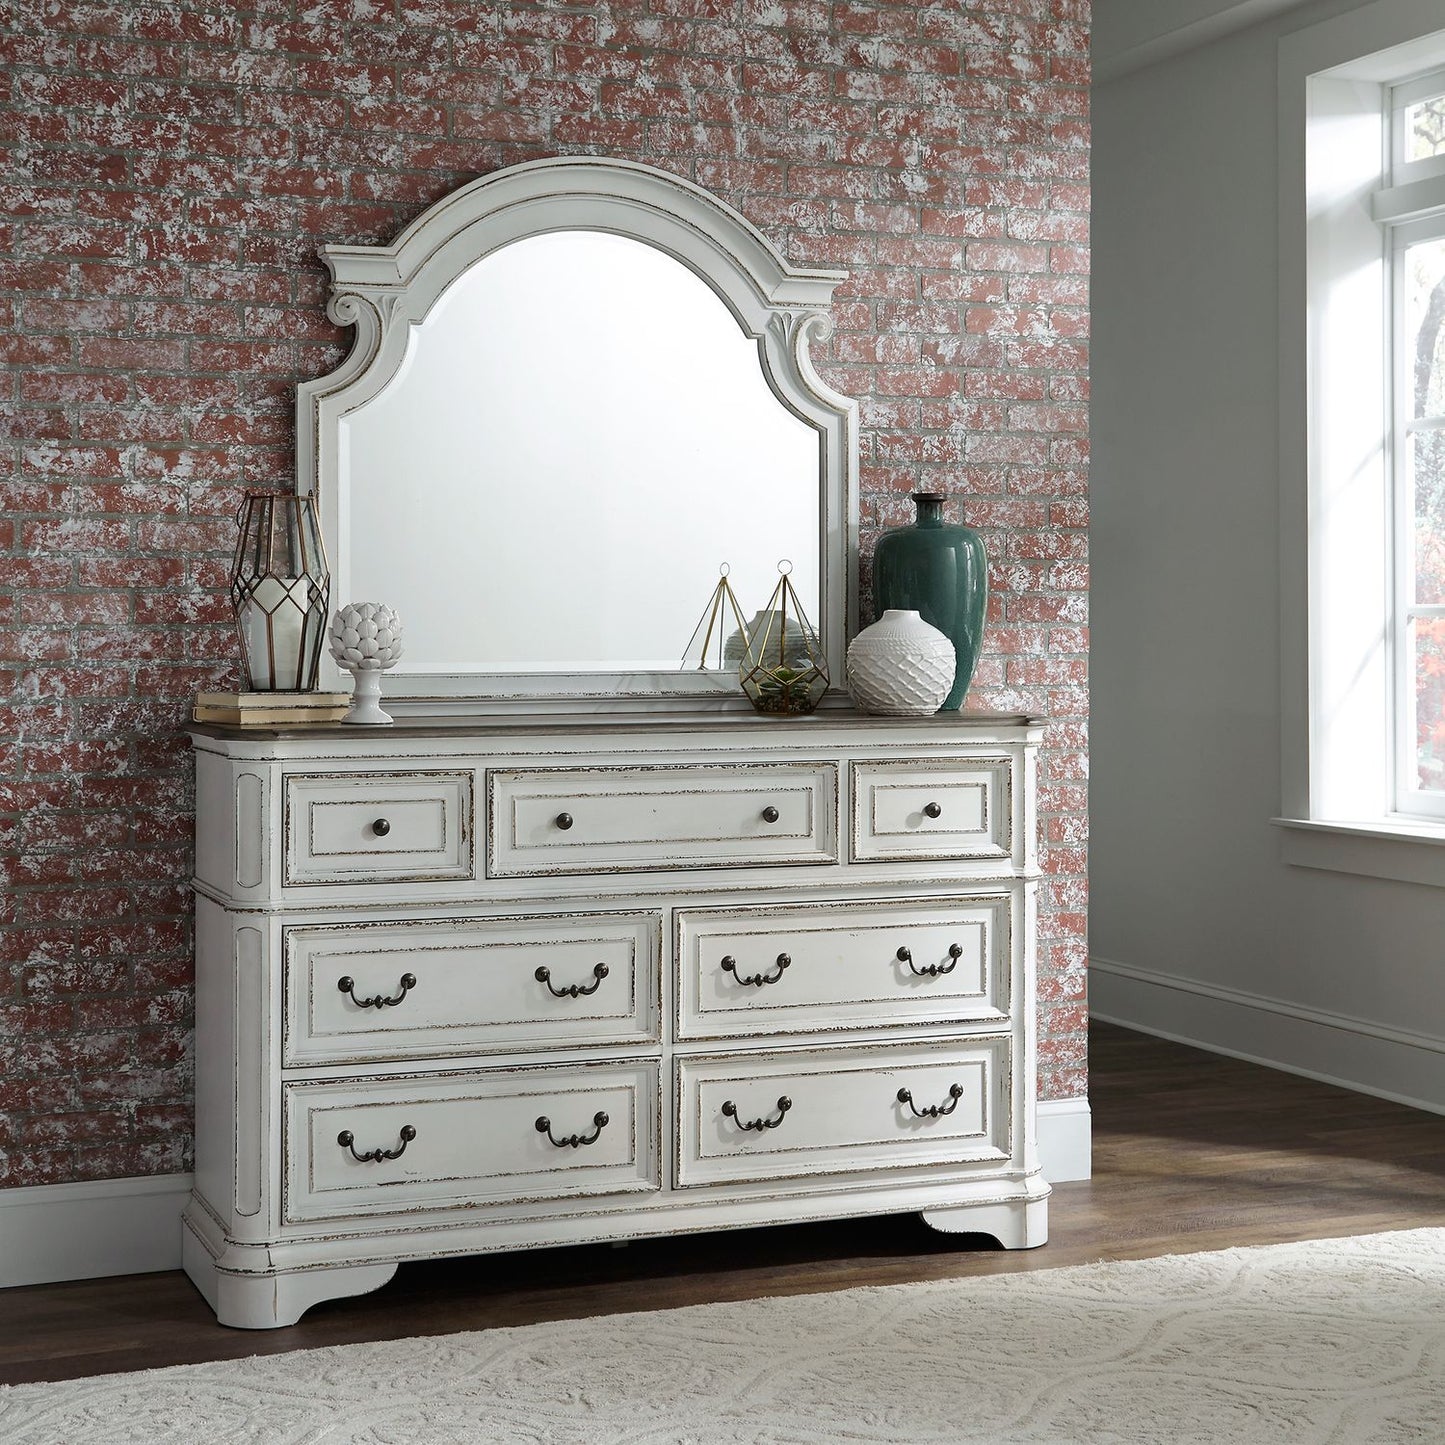 Magnolia Manor - King California Upholstered Sleigh Bed, Dresser & Mirror, Chest, Night Stand